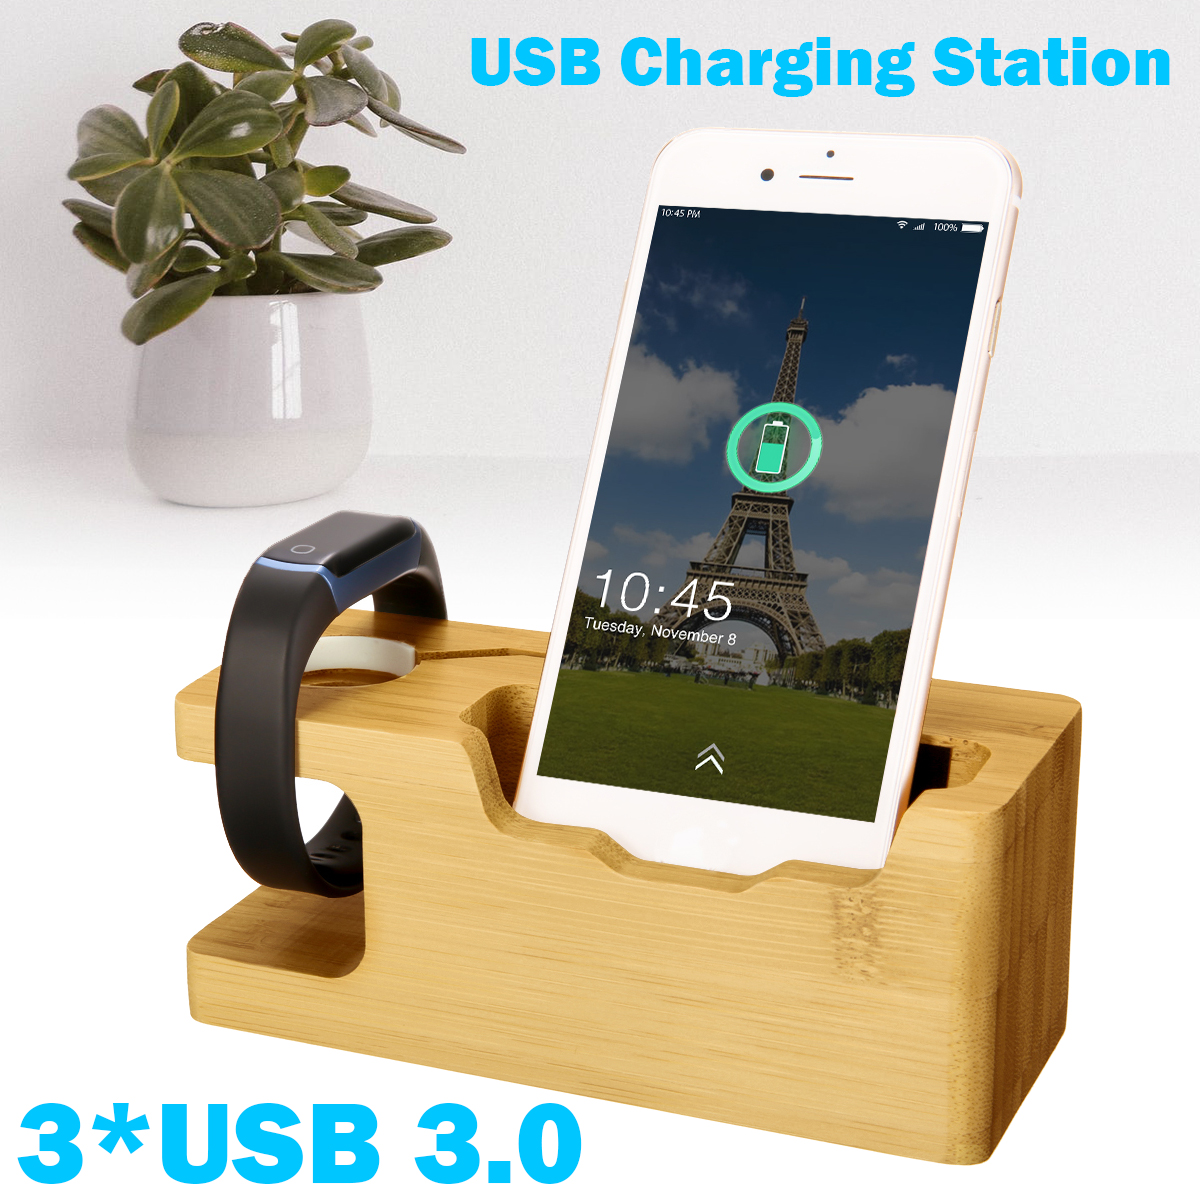 Bakeey-3USB-Charging-Station-Phone-Dock-Station-Fast-Charging-For-iPhone-XS-11Pro-MI10-Huawei-P30-P4-1720210-2